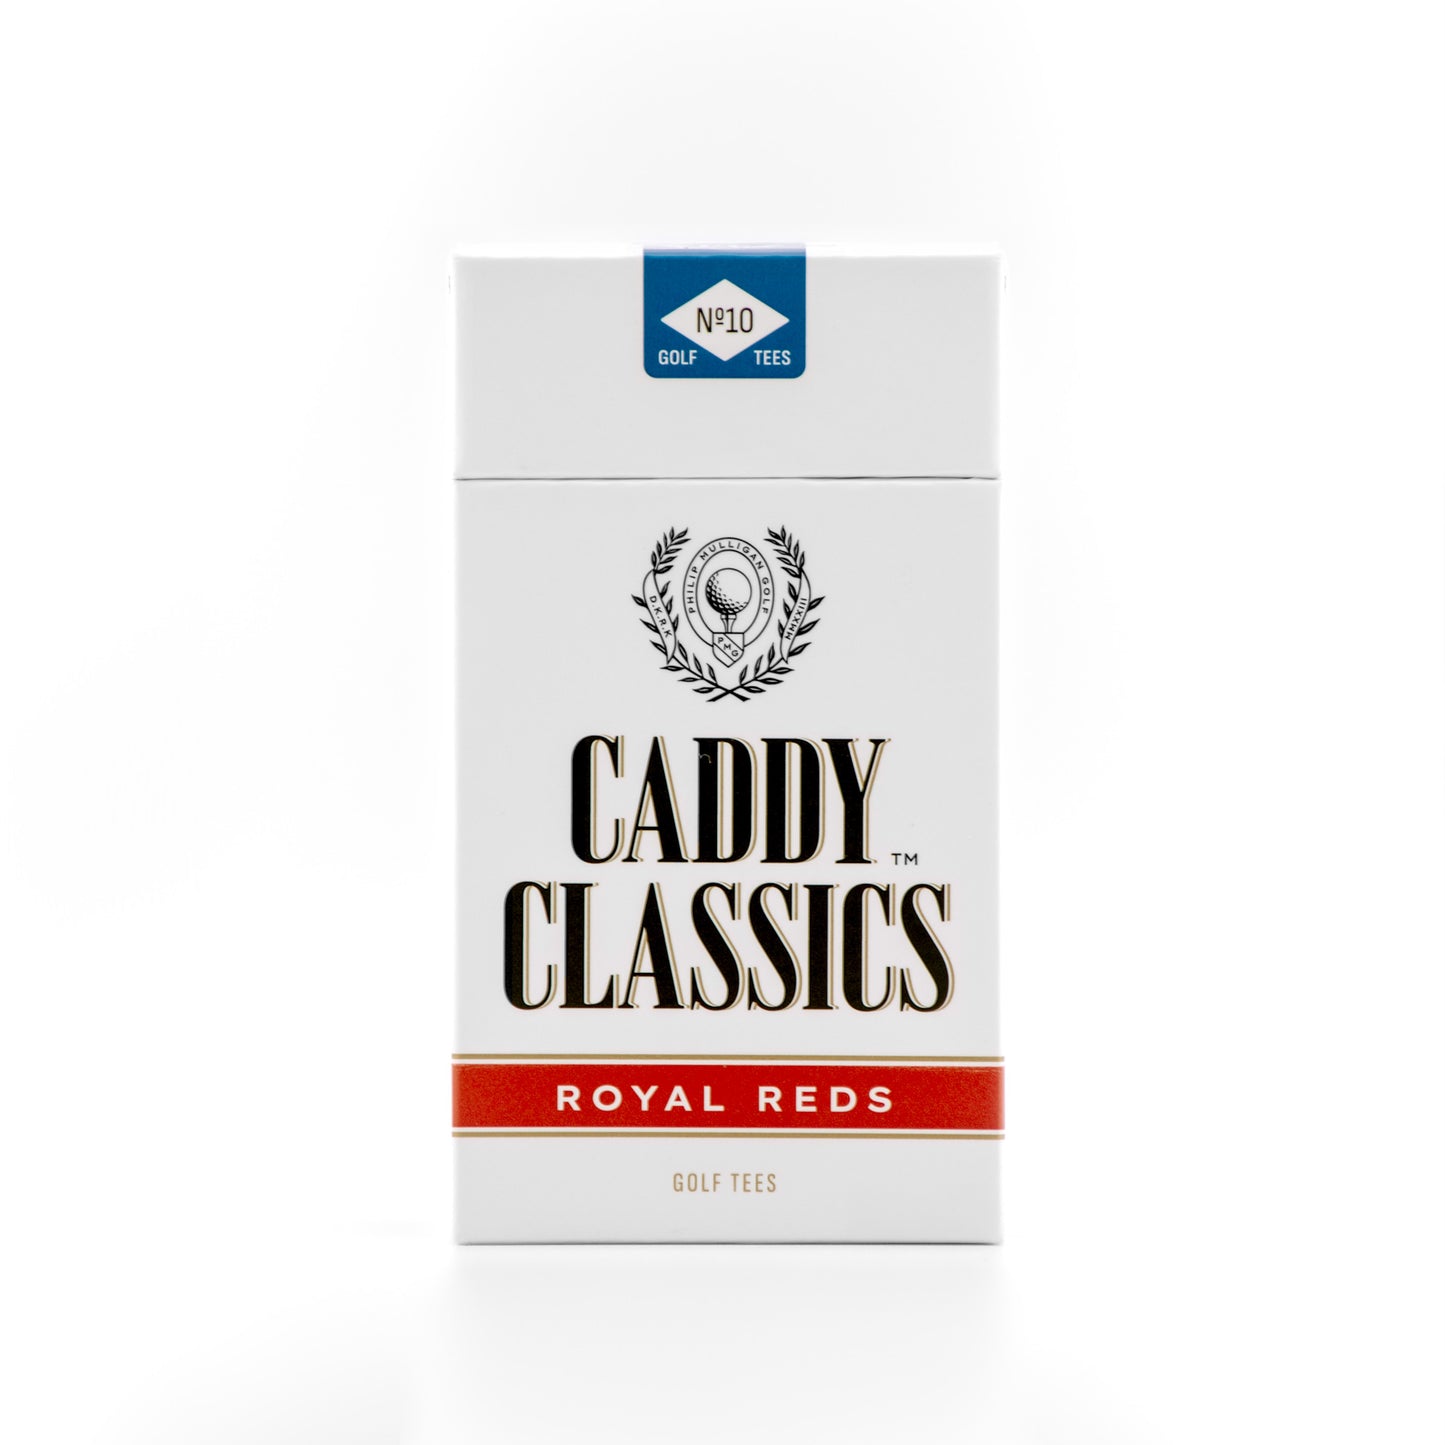 Royal Reds™ Golf Tee Holder + 110 Bamboo Cigarette-Style Tees